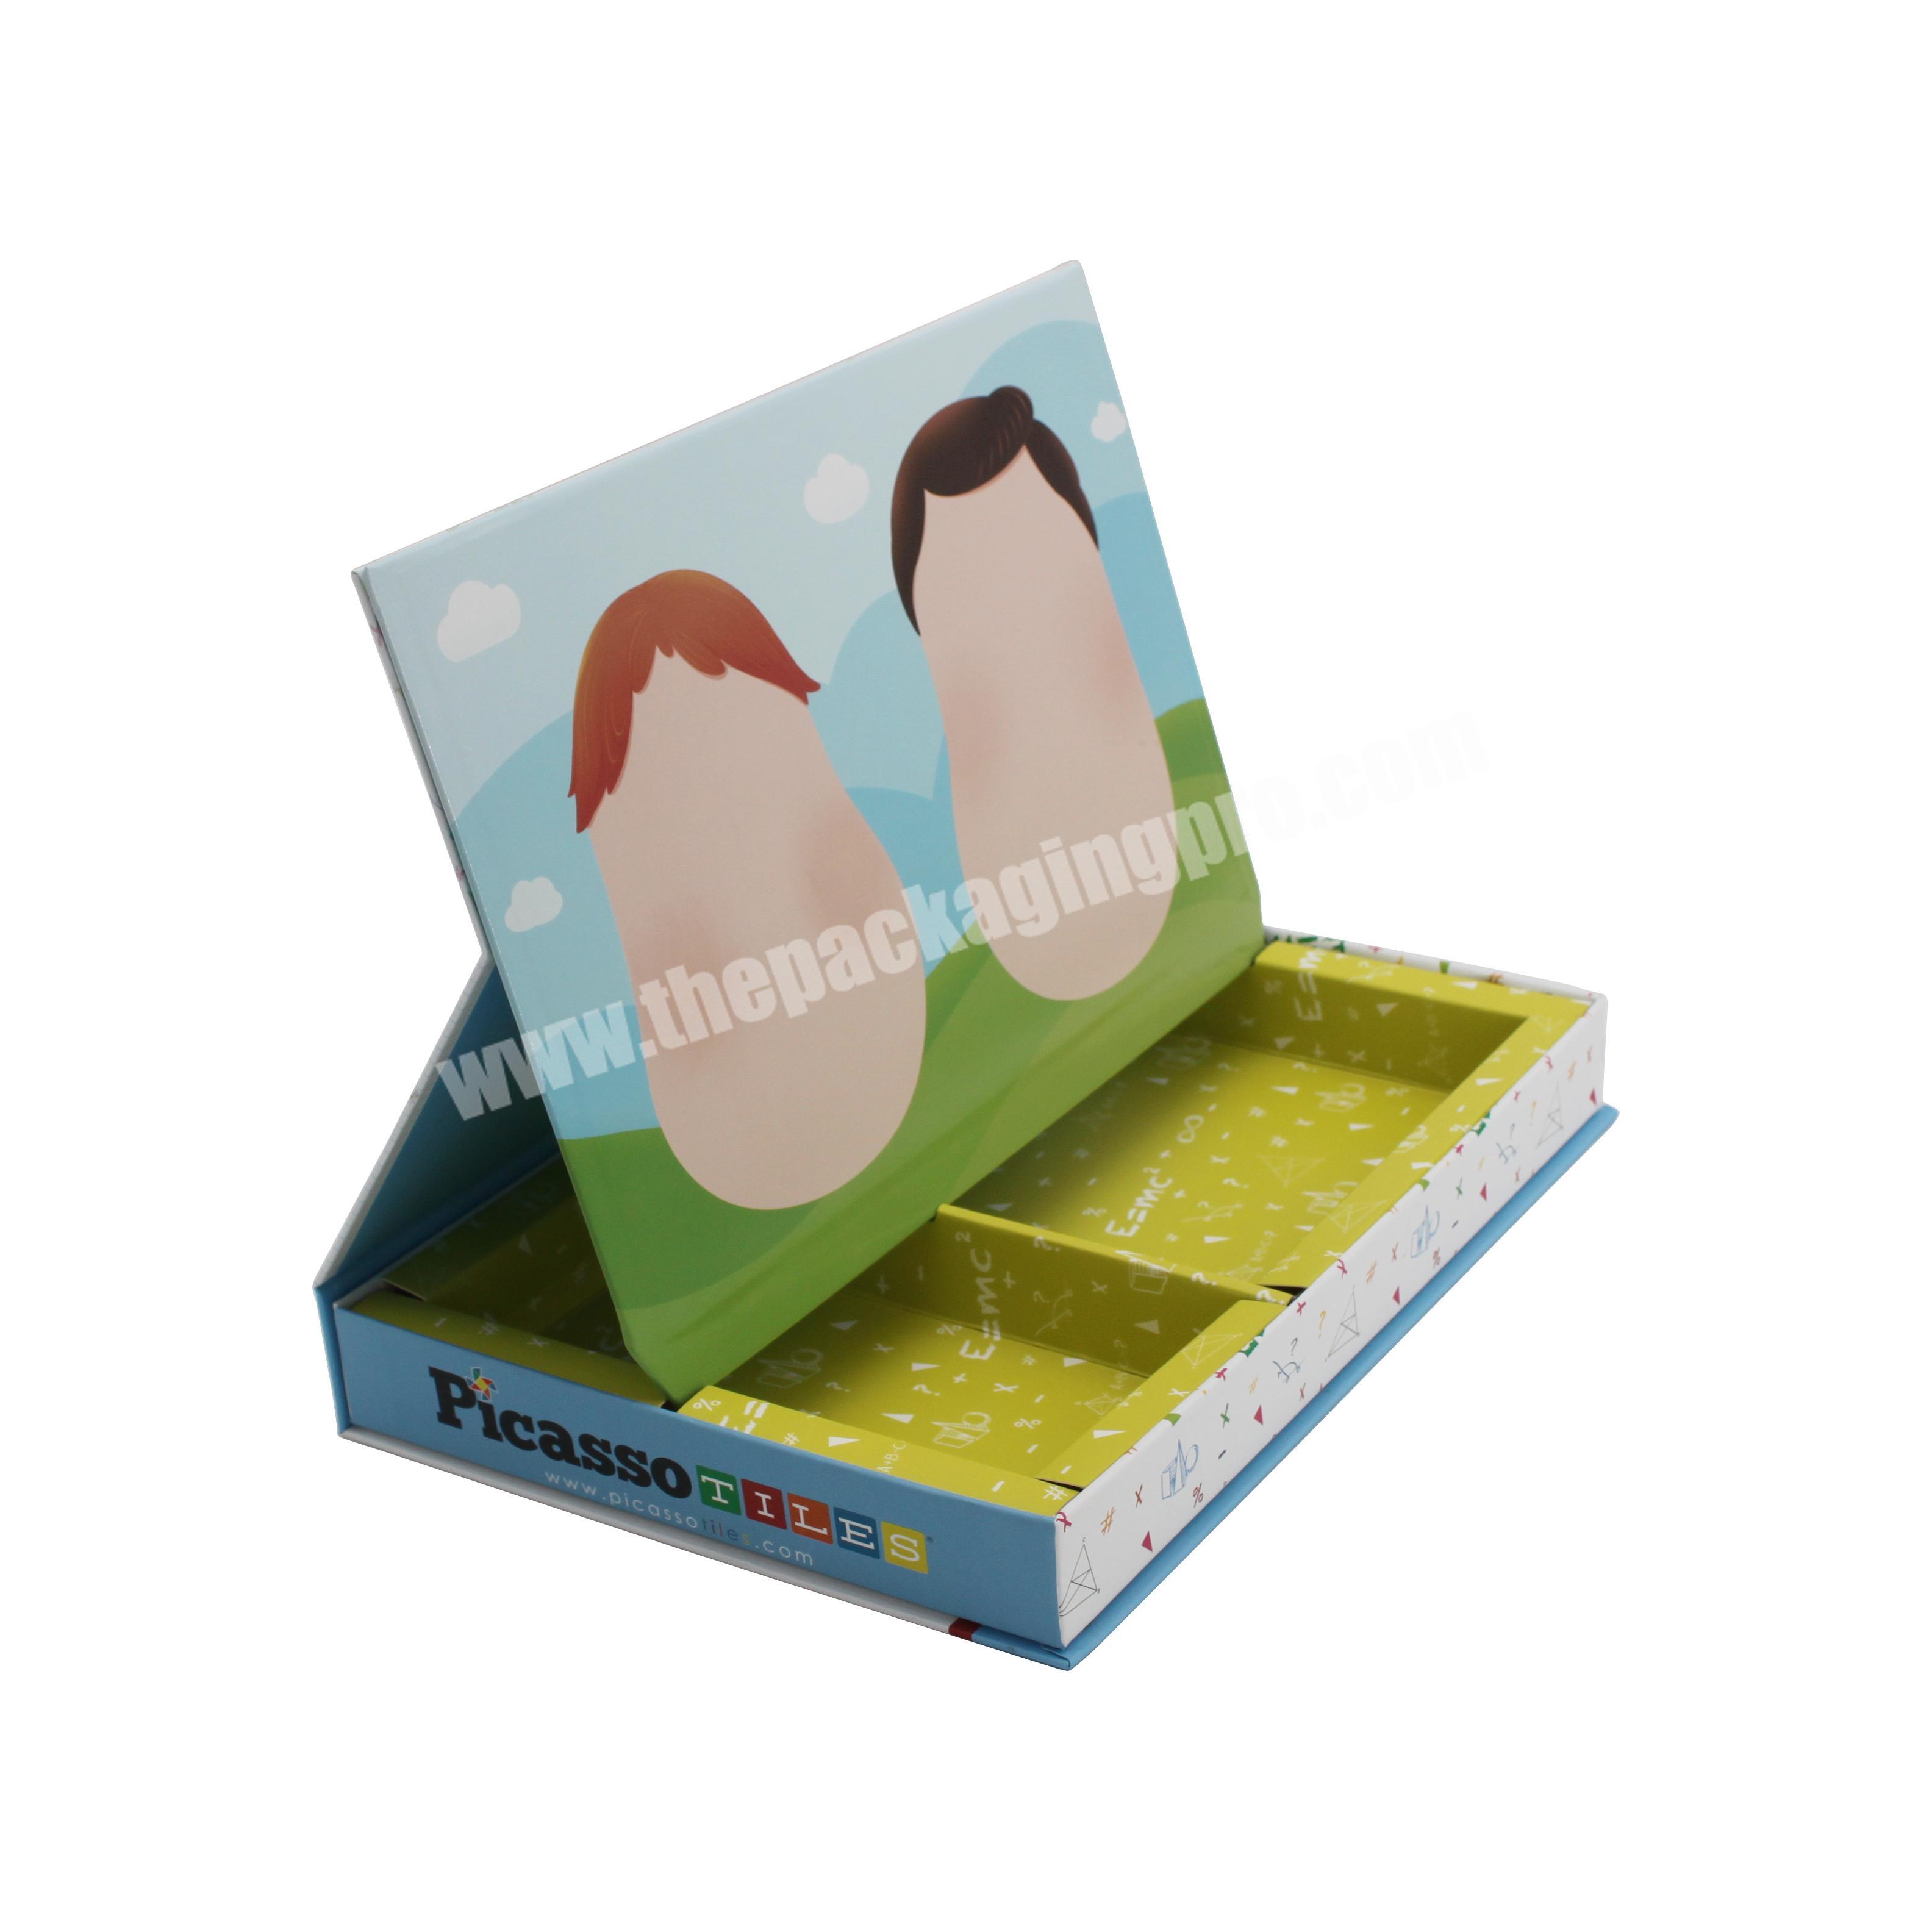 2020 Newly launched creative magnetic puzzle gift box